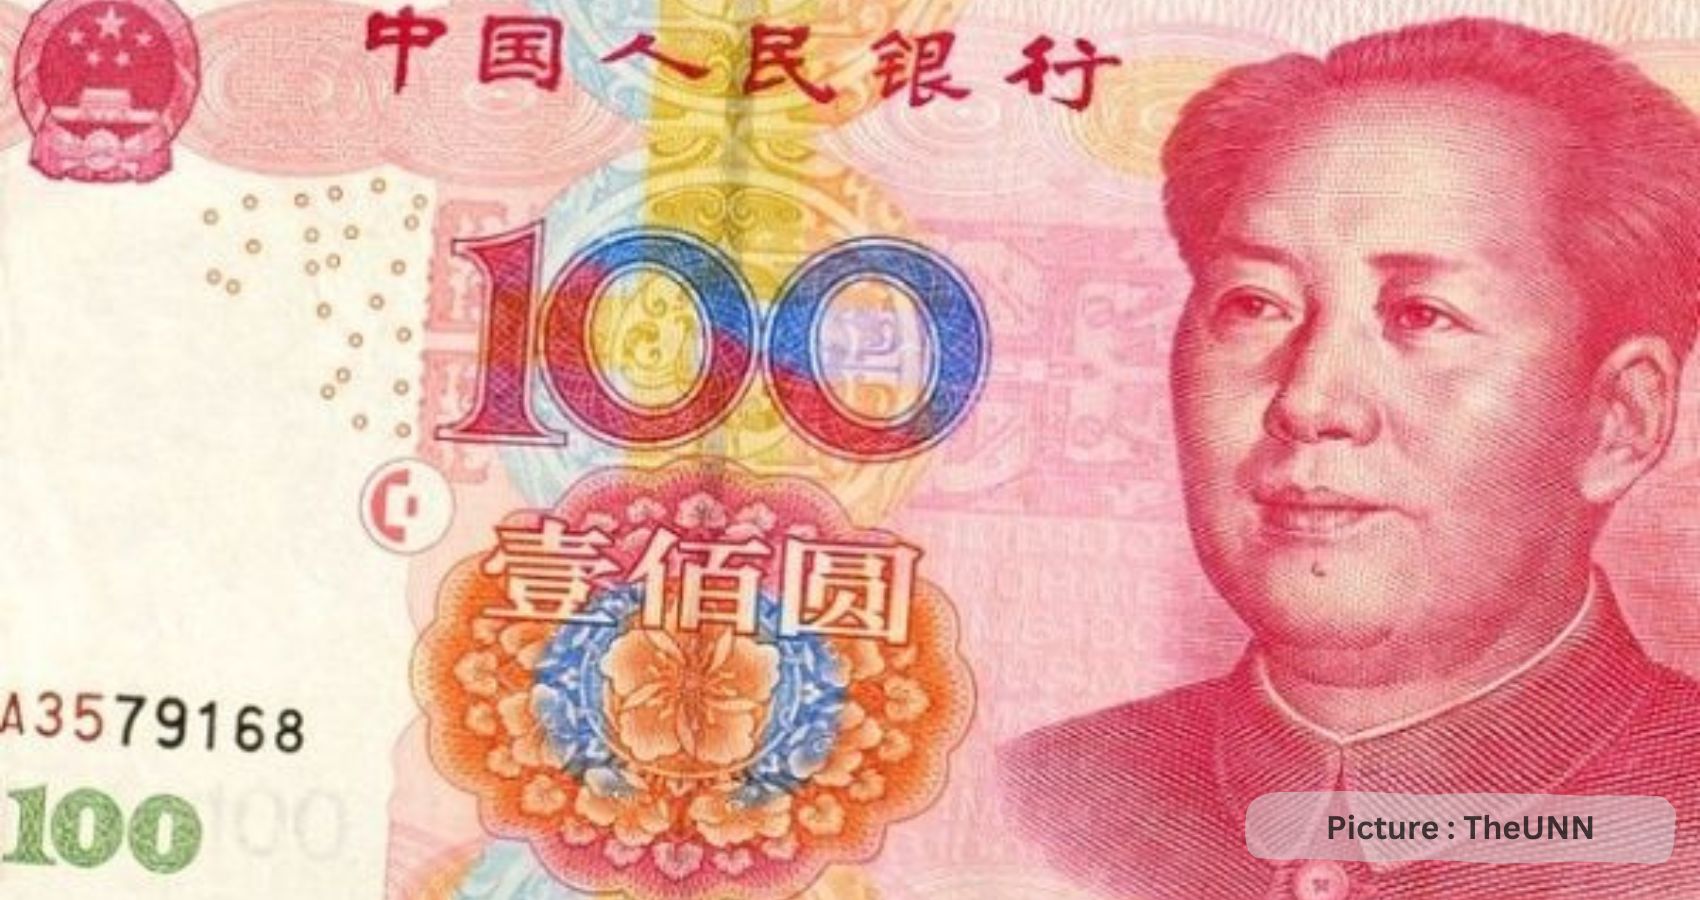 Chinese Yuan Becomes World’s Fifth Most Traded Currency, Survey Finds